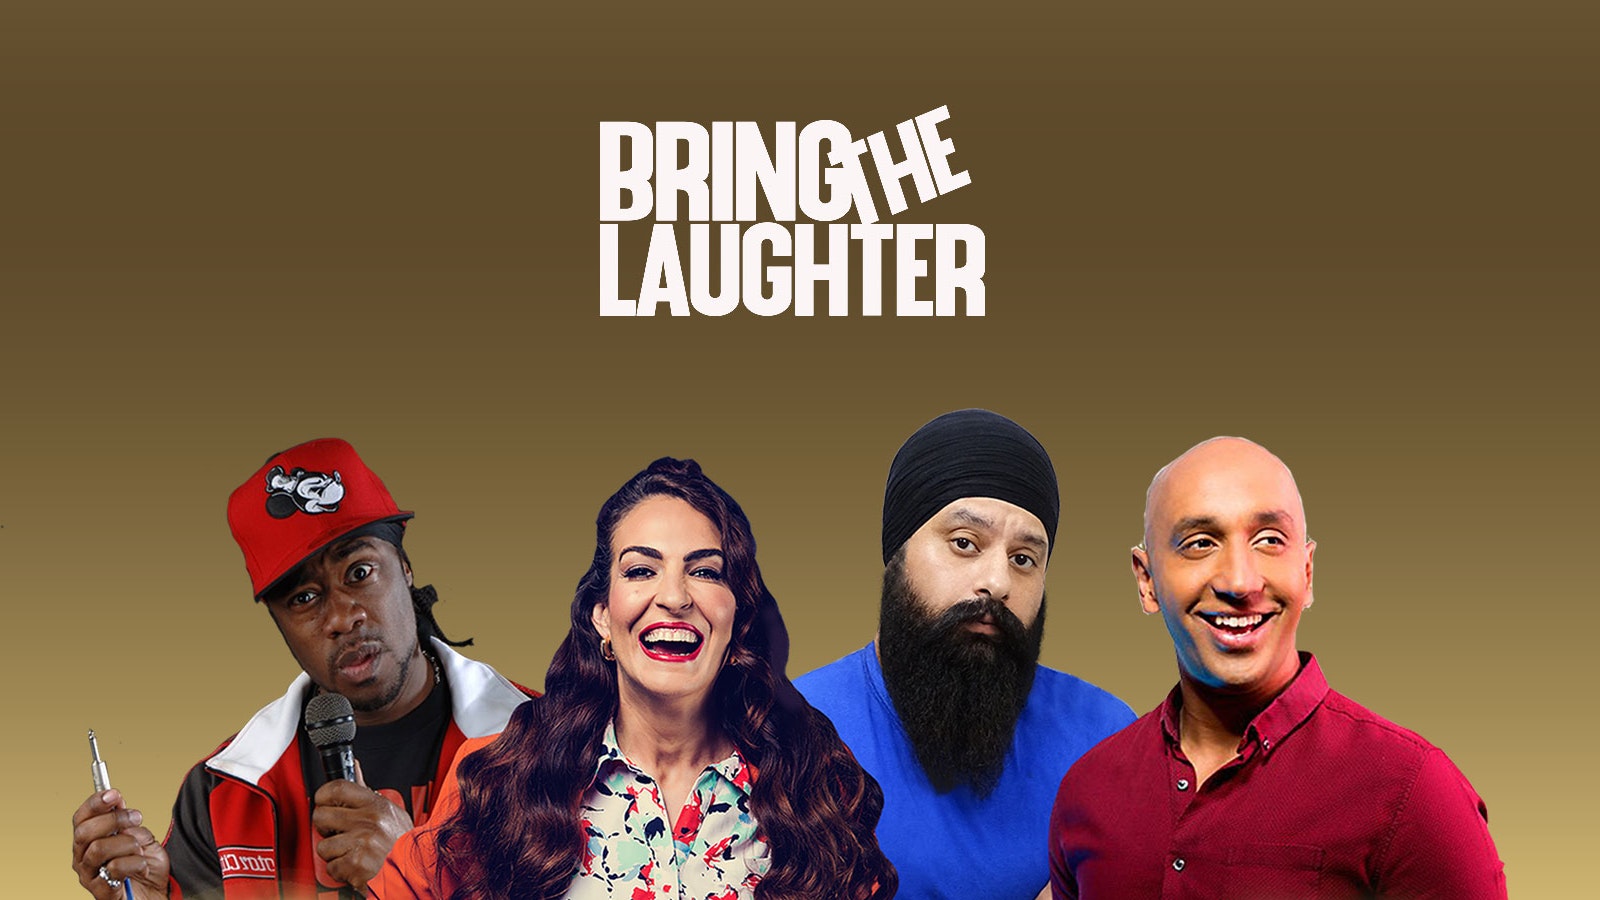 Bring The Laughter – Camberley